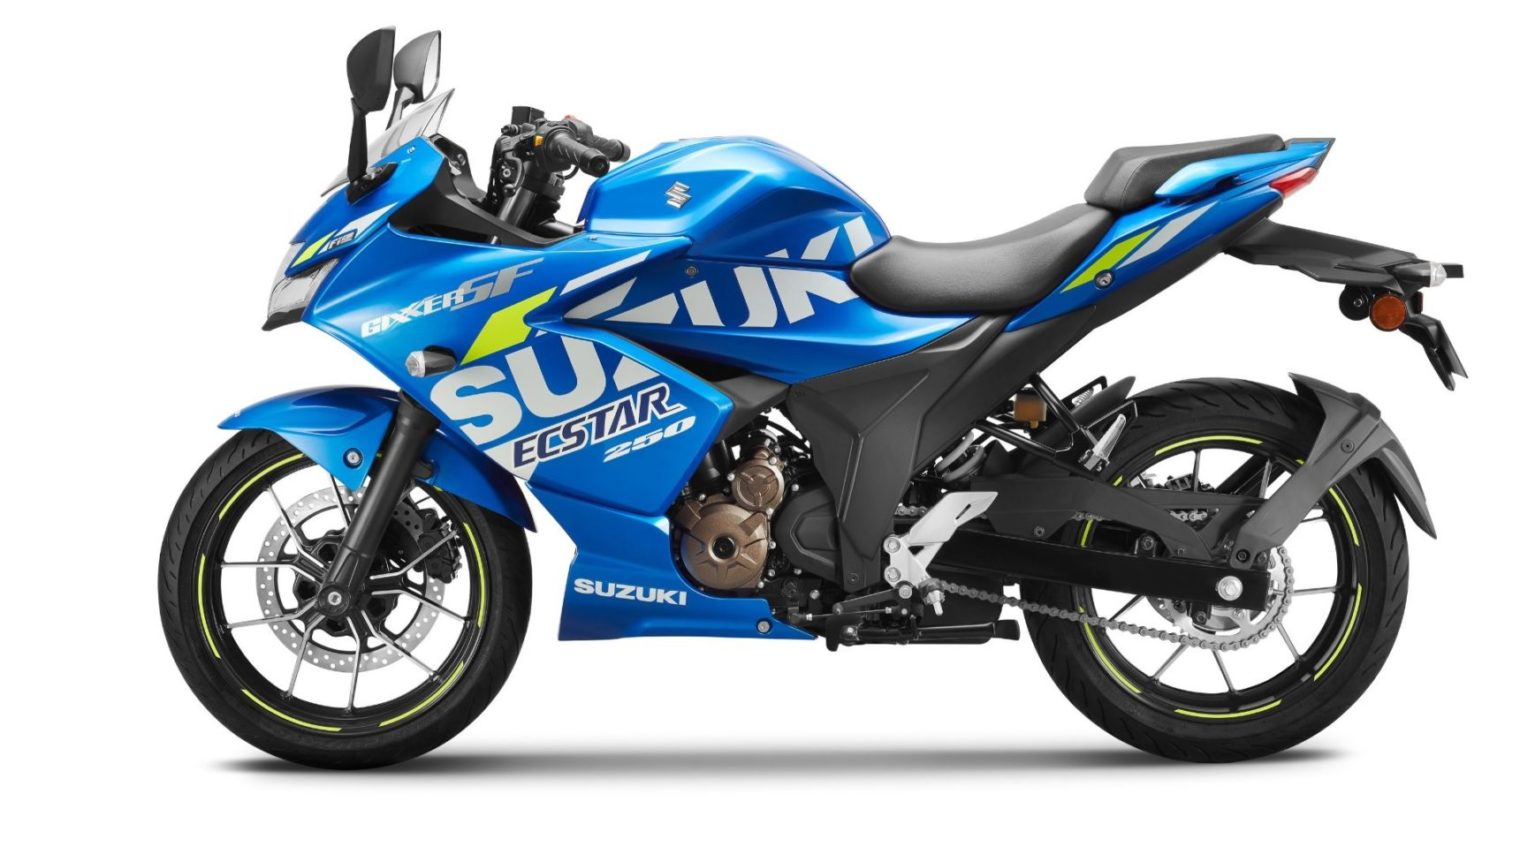  Suzuki  Gixxer SF 250  Moto GP  Edition Launched Priced At 